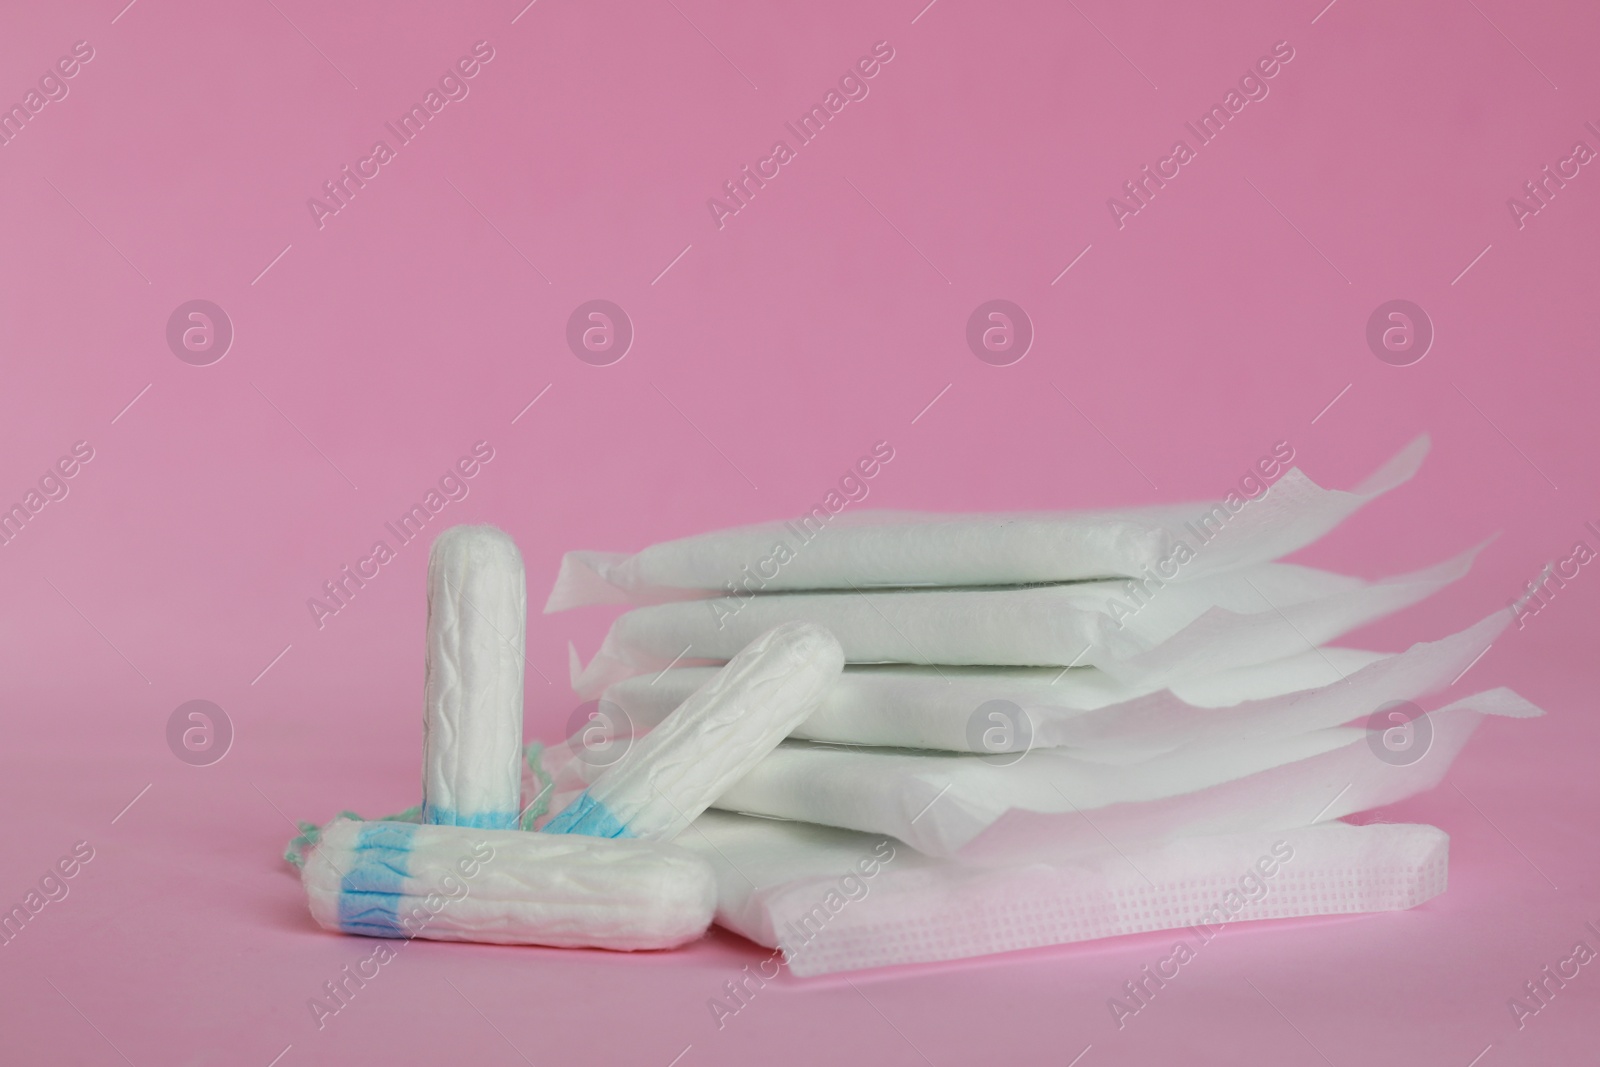 Photo of Menstrual pads and tampons on pink background